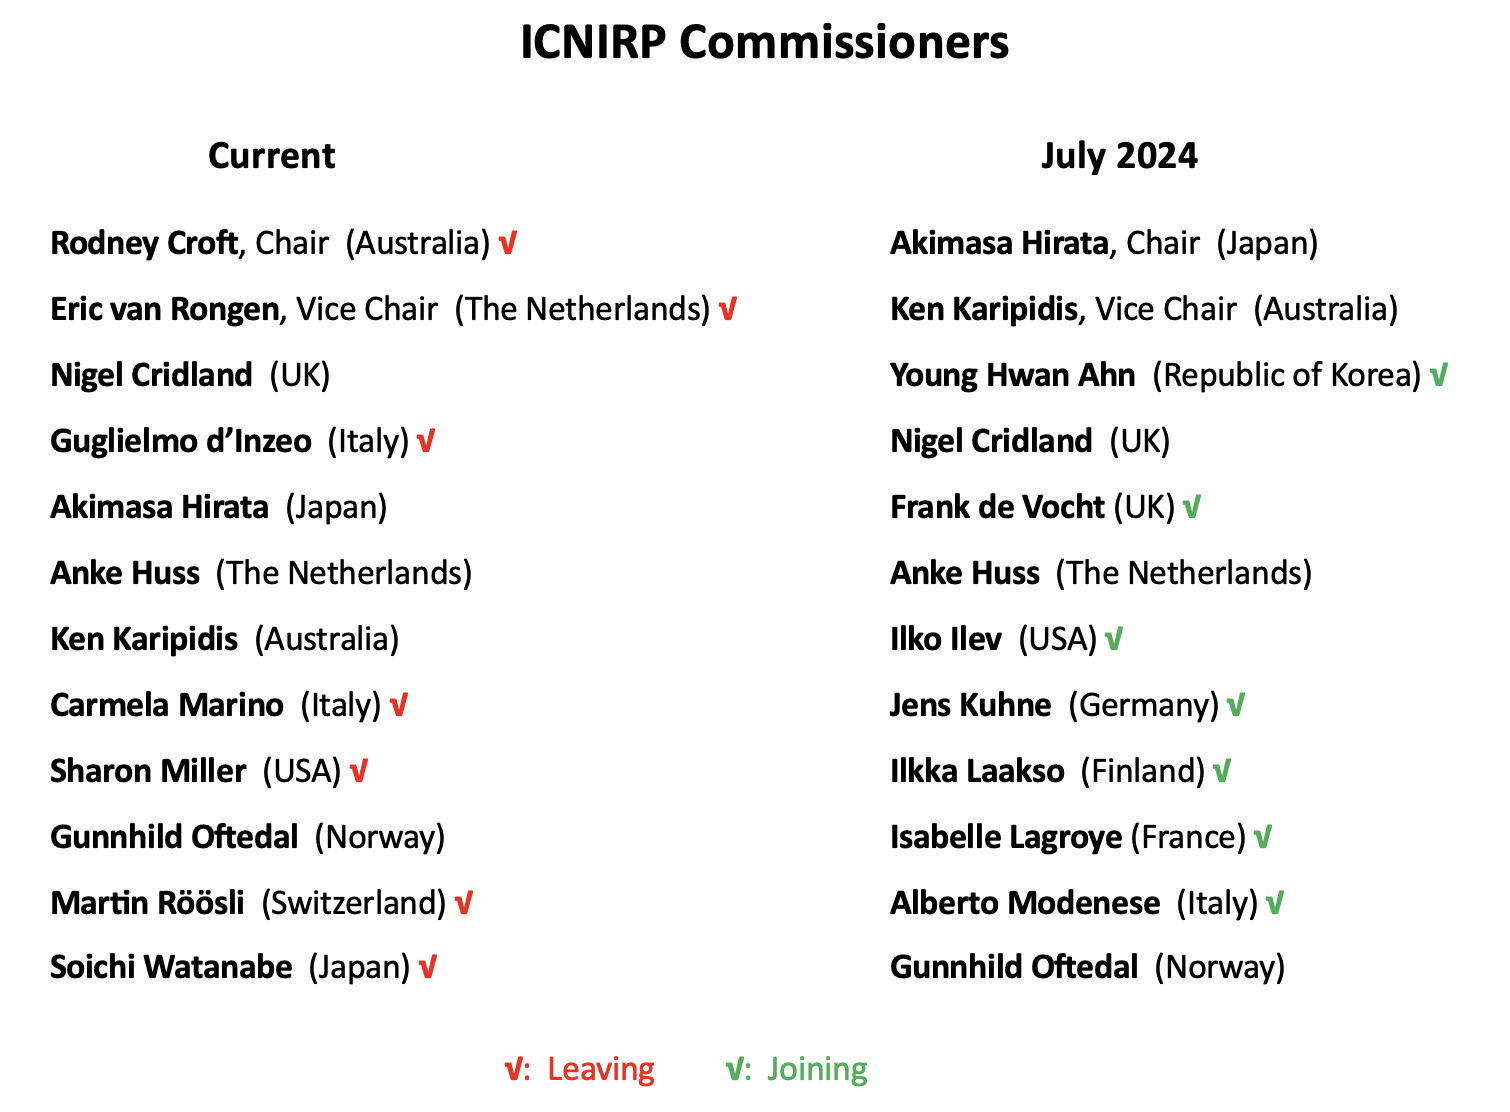 ICNIRP 2023 and 2024